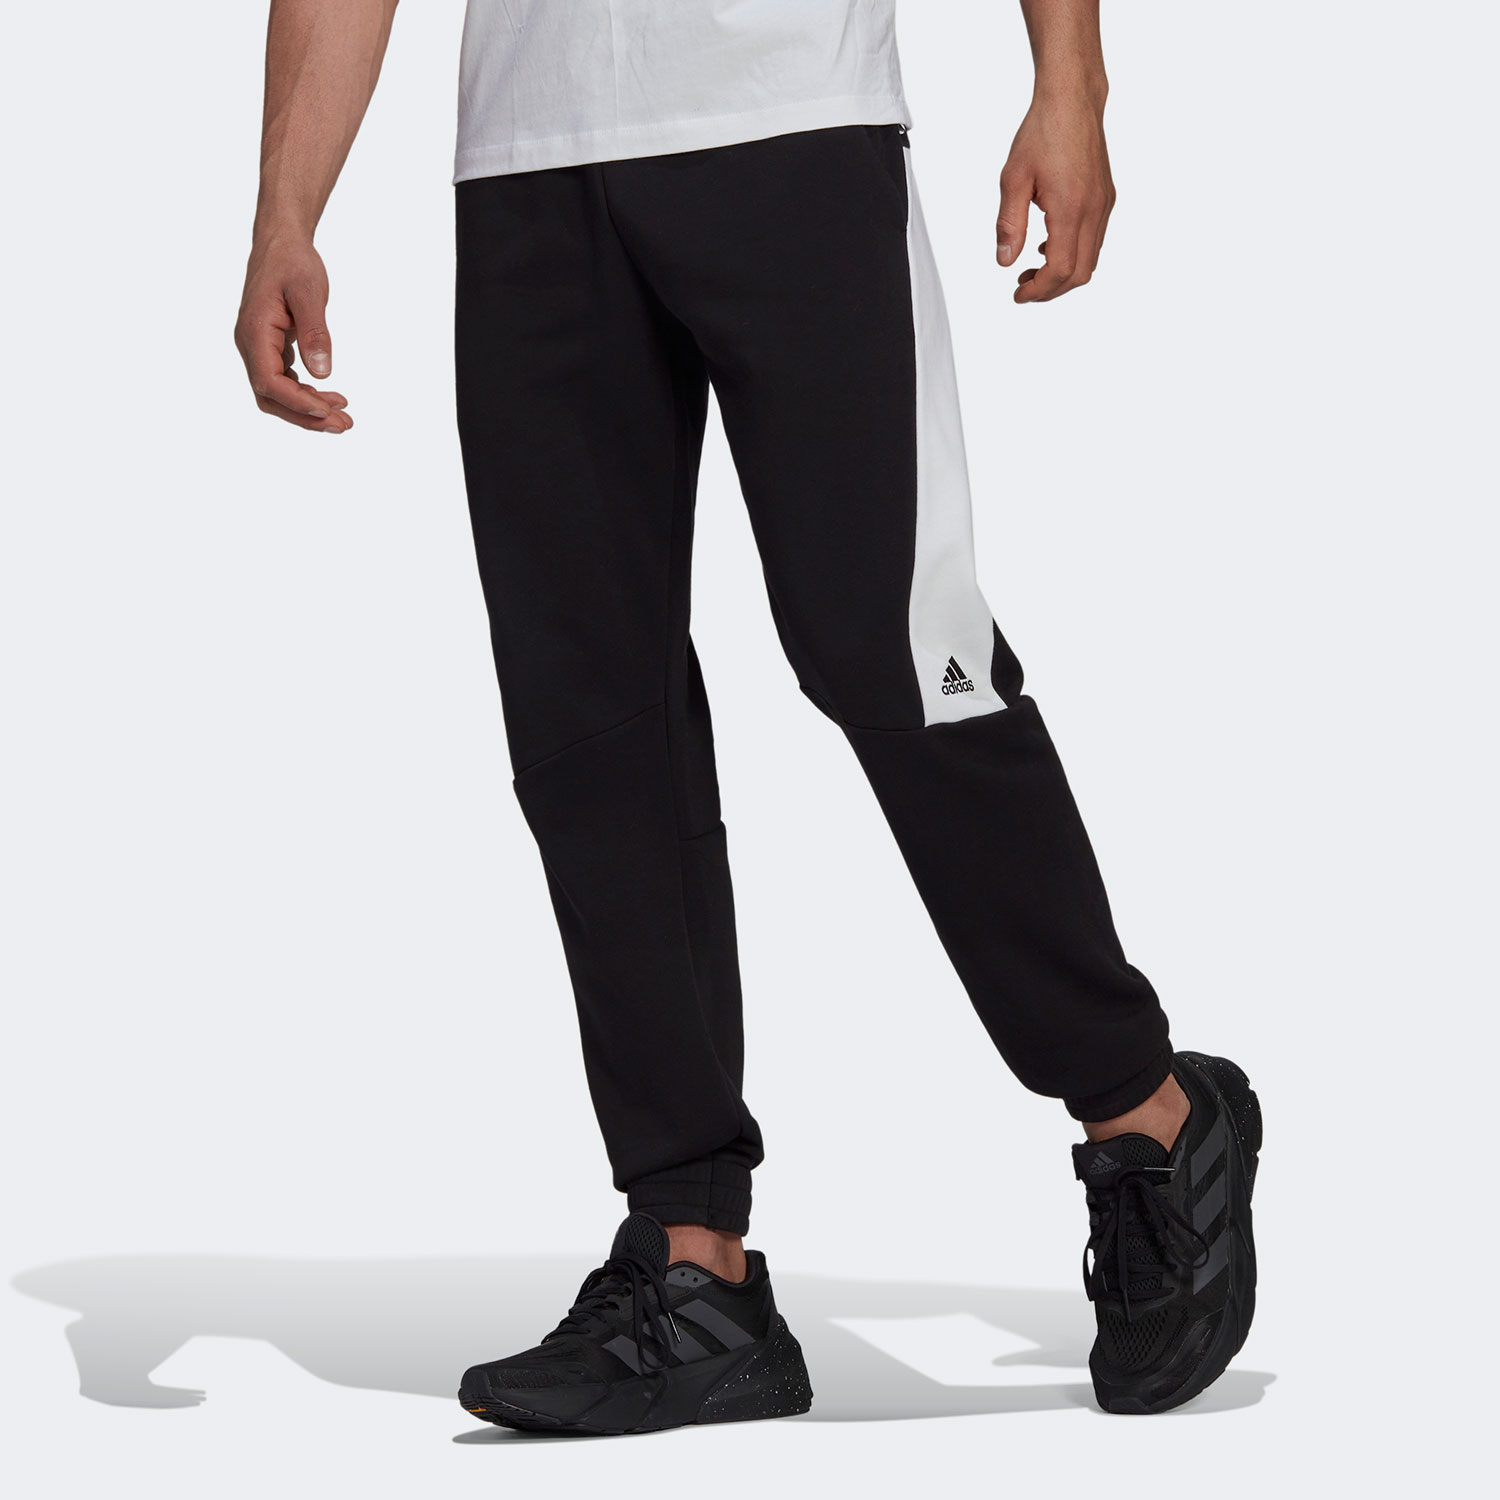 ADIDAS FUTURE ICONS EMBROIDERED BADGE OF SPORT PANTS ΜΑΥΡΟ